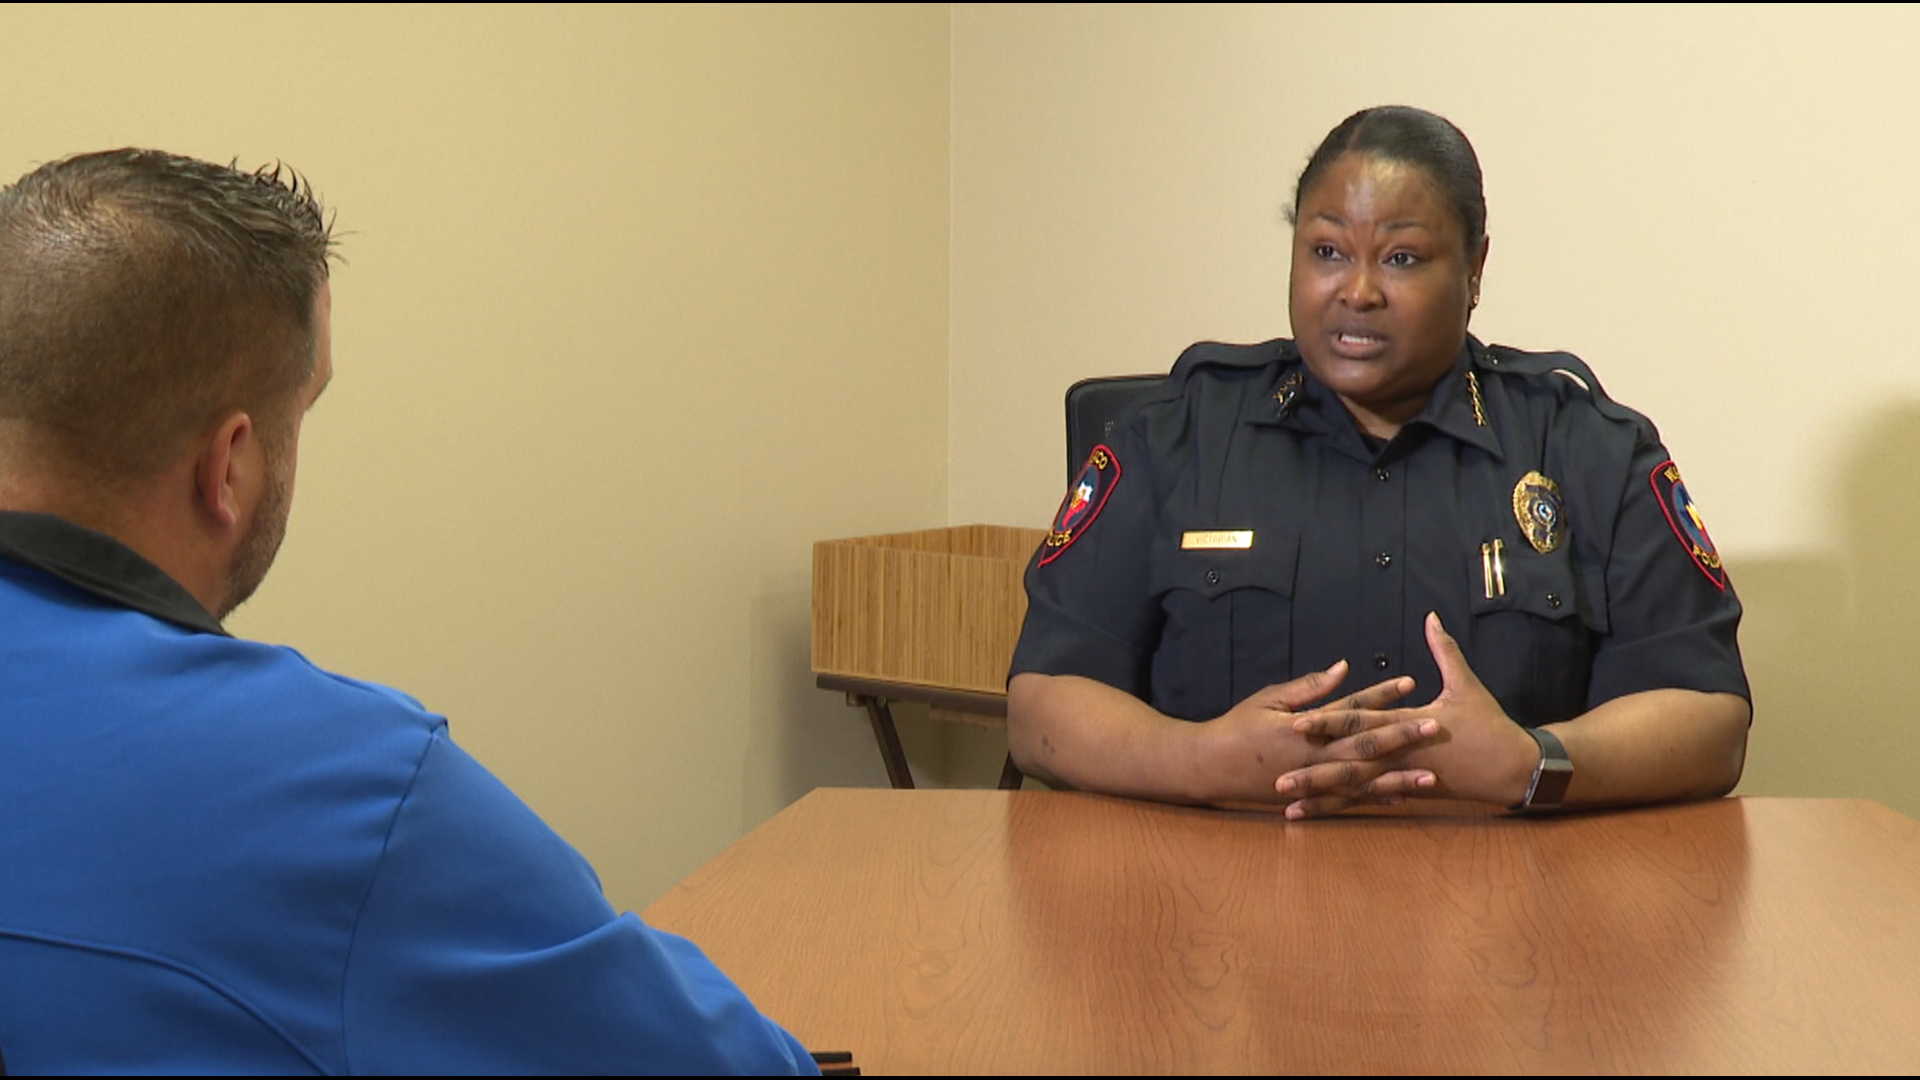 Chief Sheryl Victorian talks Chauvin, race relations and heroes in a candid sit-down with 6 News.